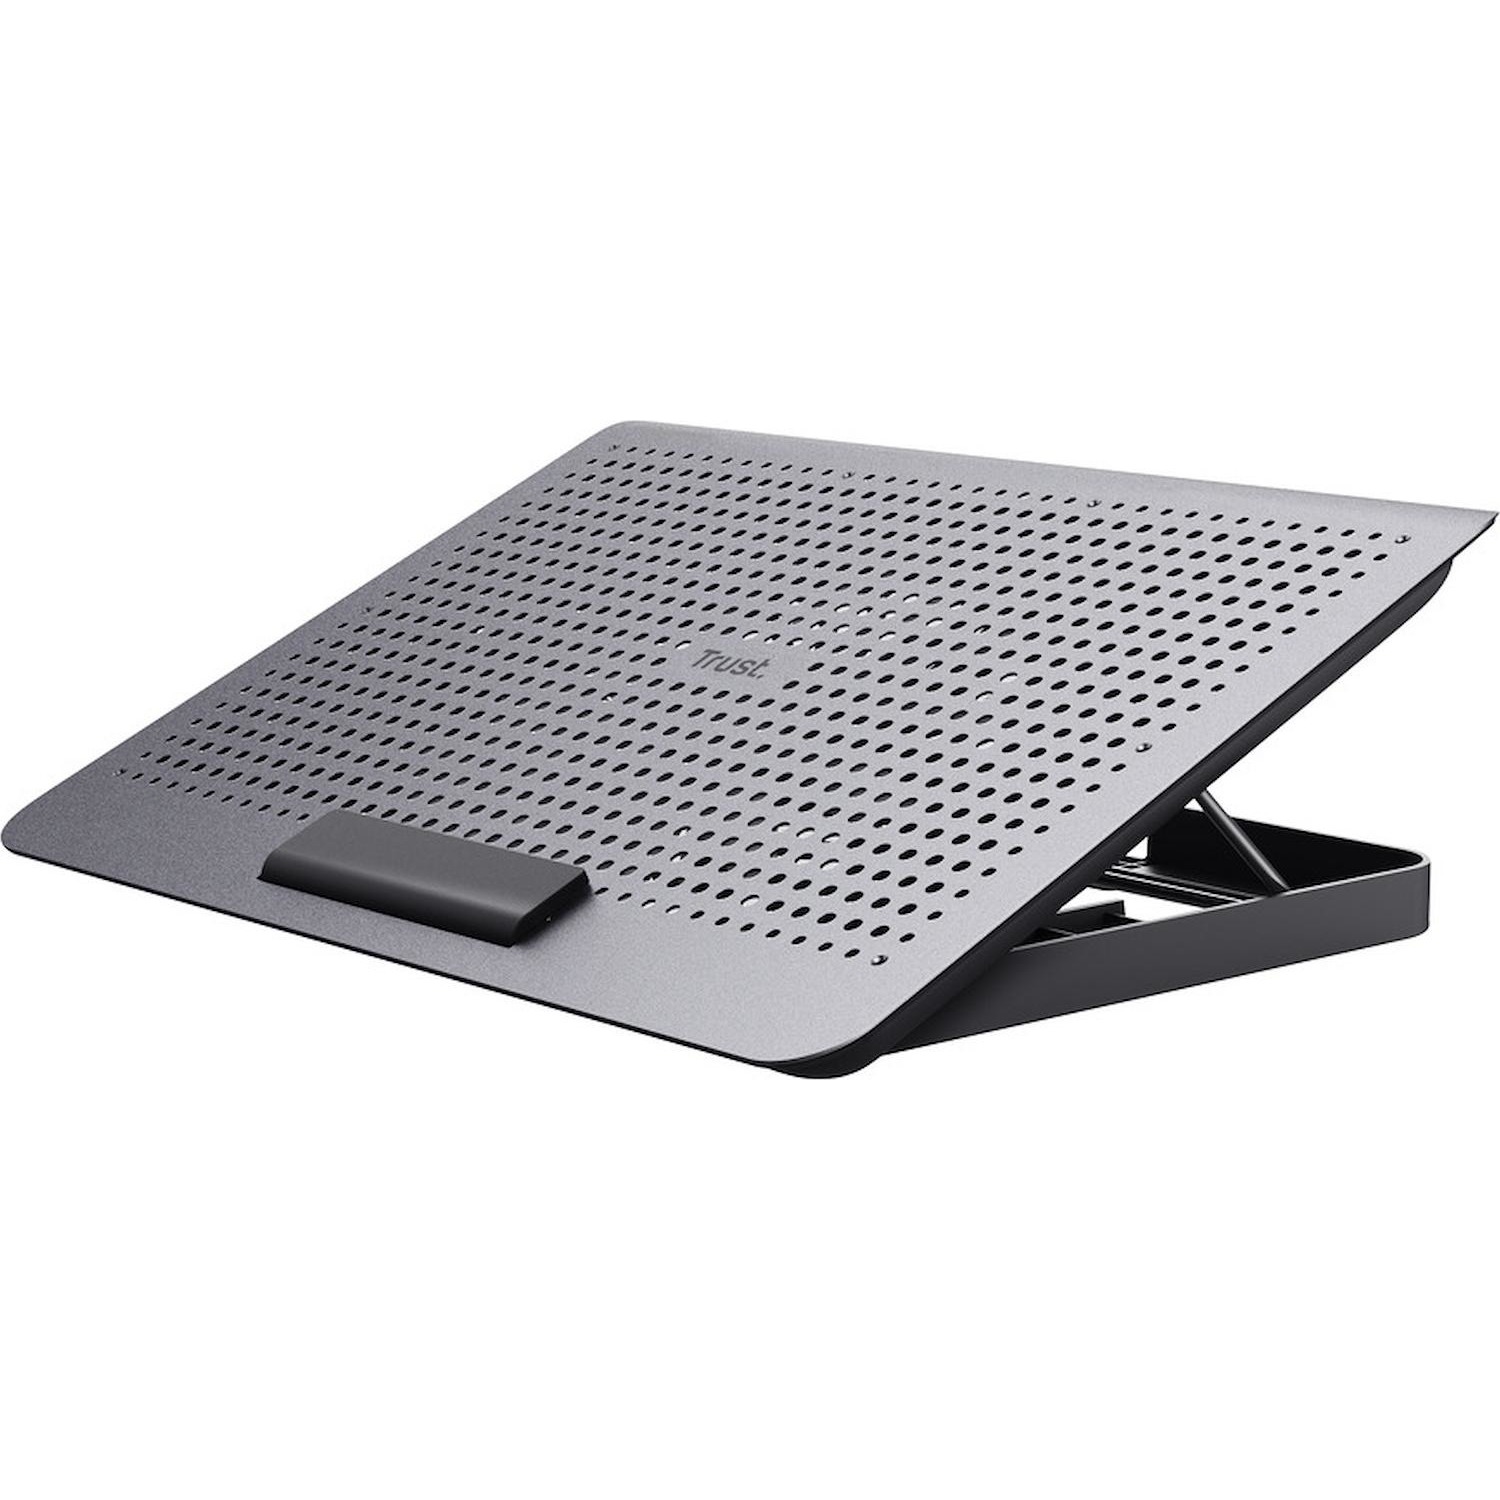 Supporto Exto laptop cooling stand eco - DIMOStore